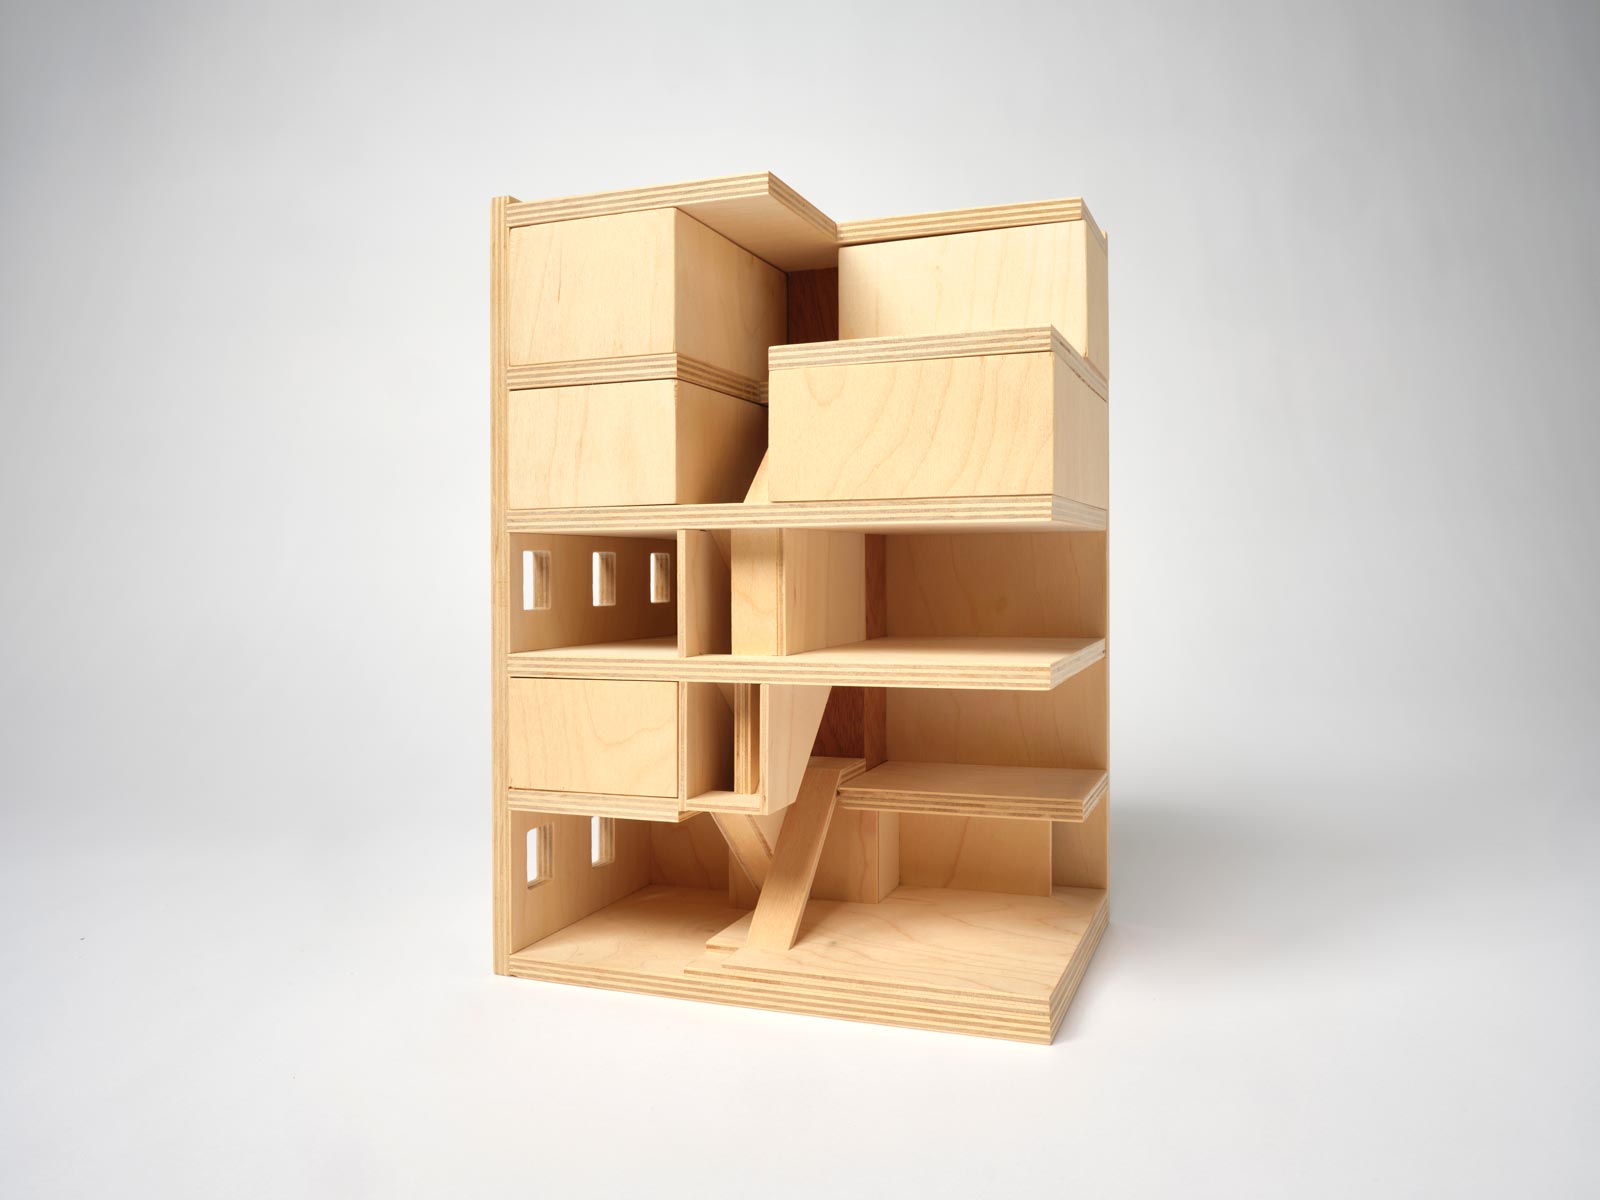 three generation house by BETA model photo showing configuration possibility image by Tim Stet